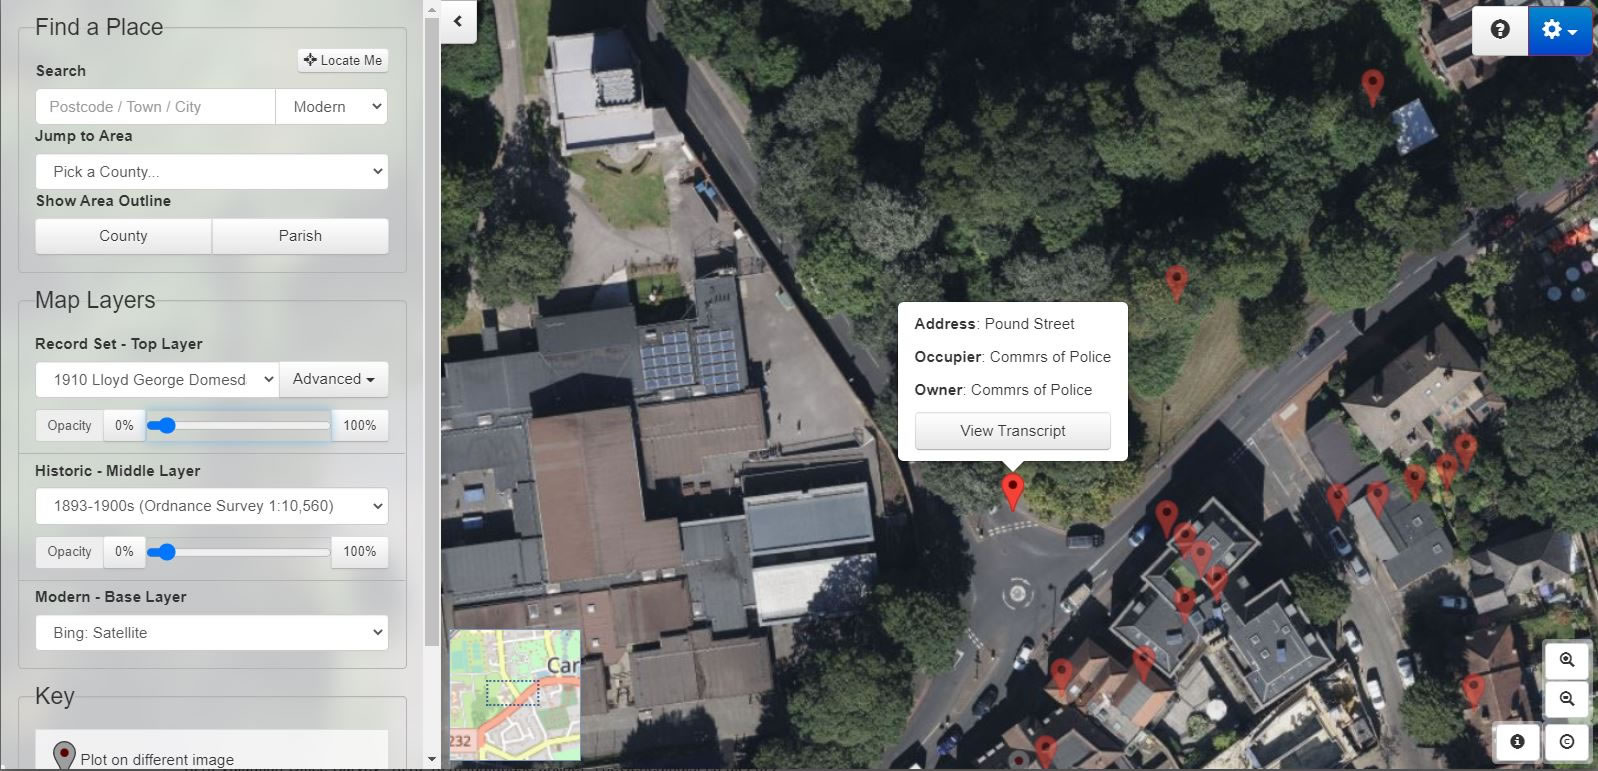 Viewing the Bing satellite map as the modern layer there is no sign of the old Police building